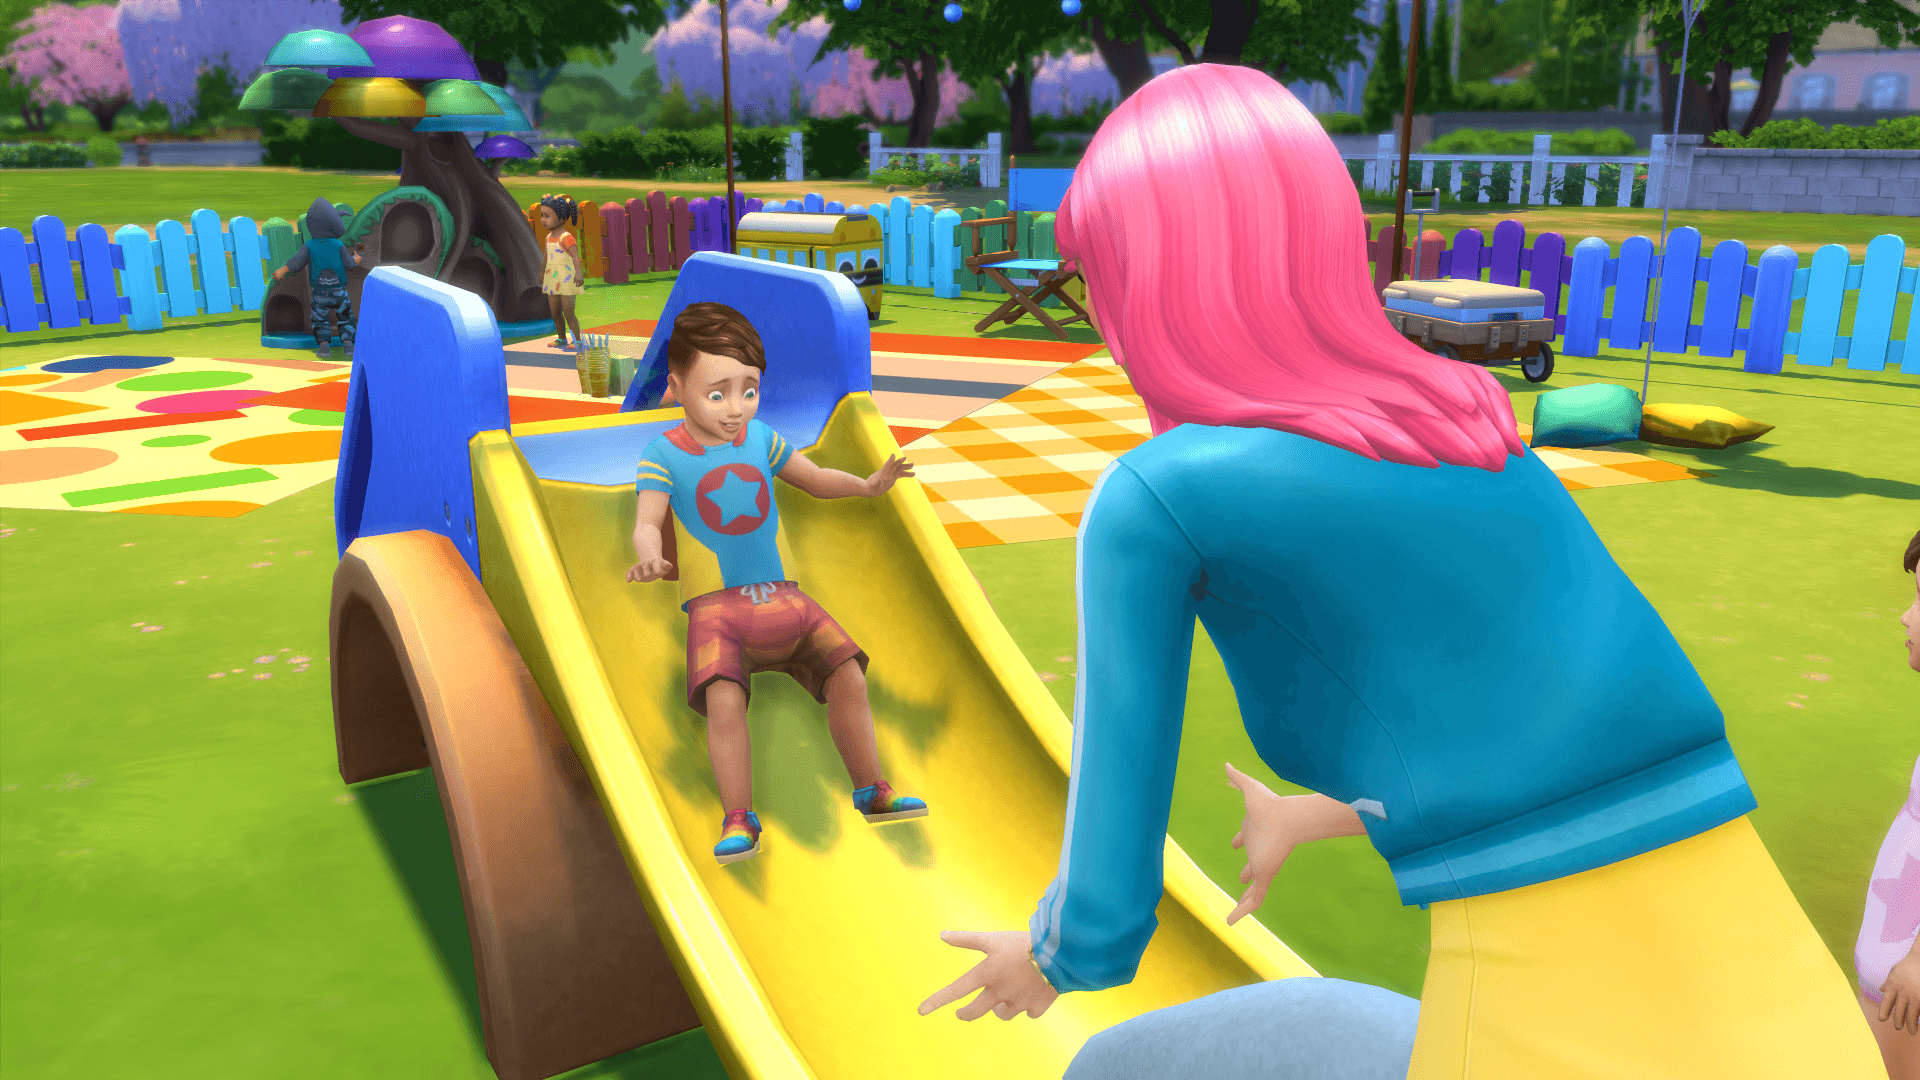 The Sims 4: Toddler Stuff coming soon